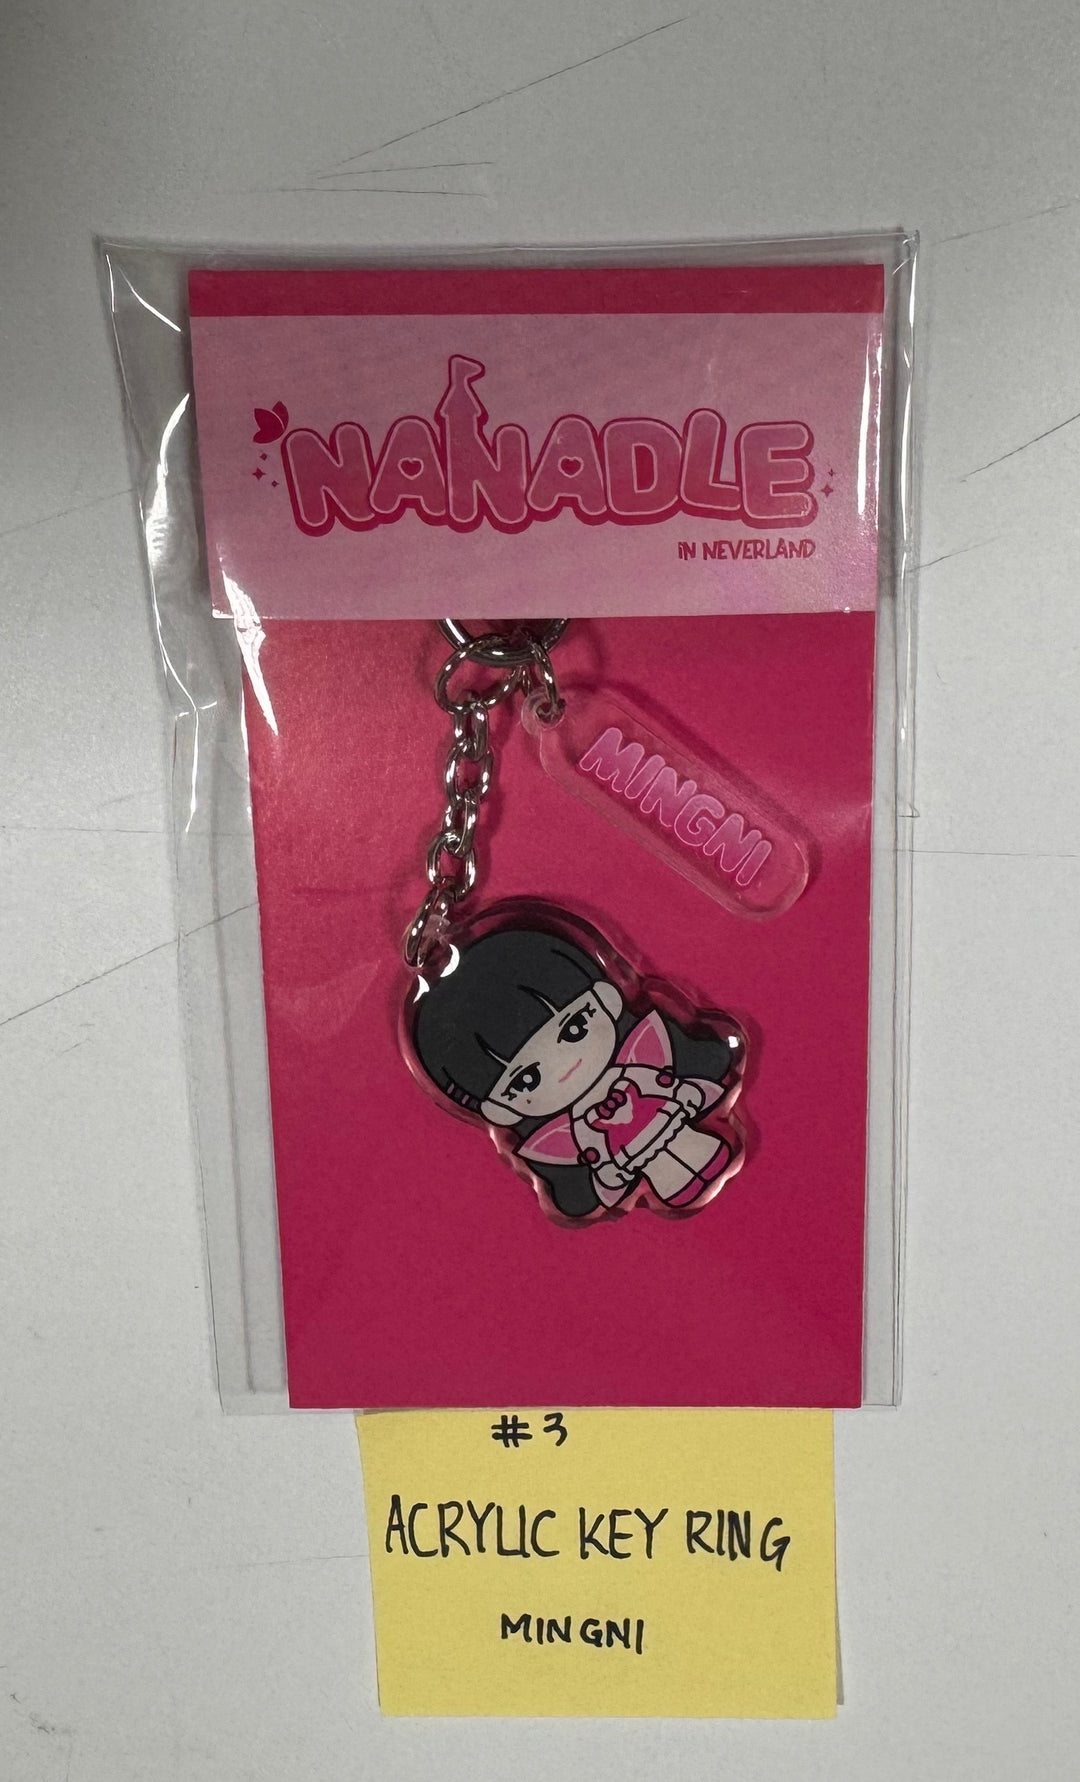 (g) I-DLE "NANADLE IN NEVERLAND" -Soundwave Pop-Up MD [Hand Mirror, Mini Pouch Patch Set, Acrylic Keyring, Photocard Acrylic Stand] [24.5.2]